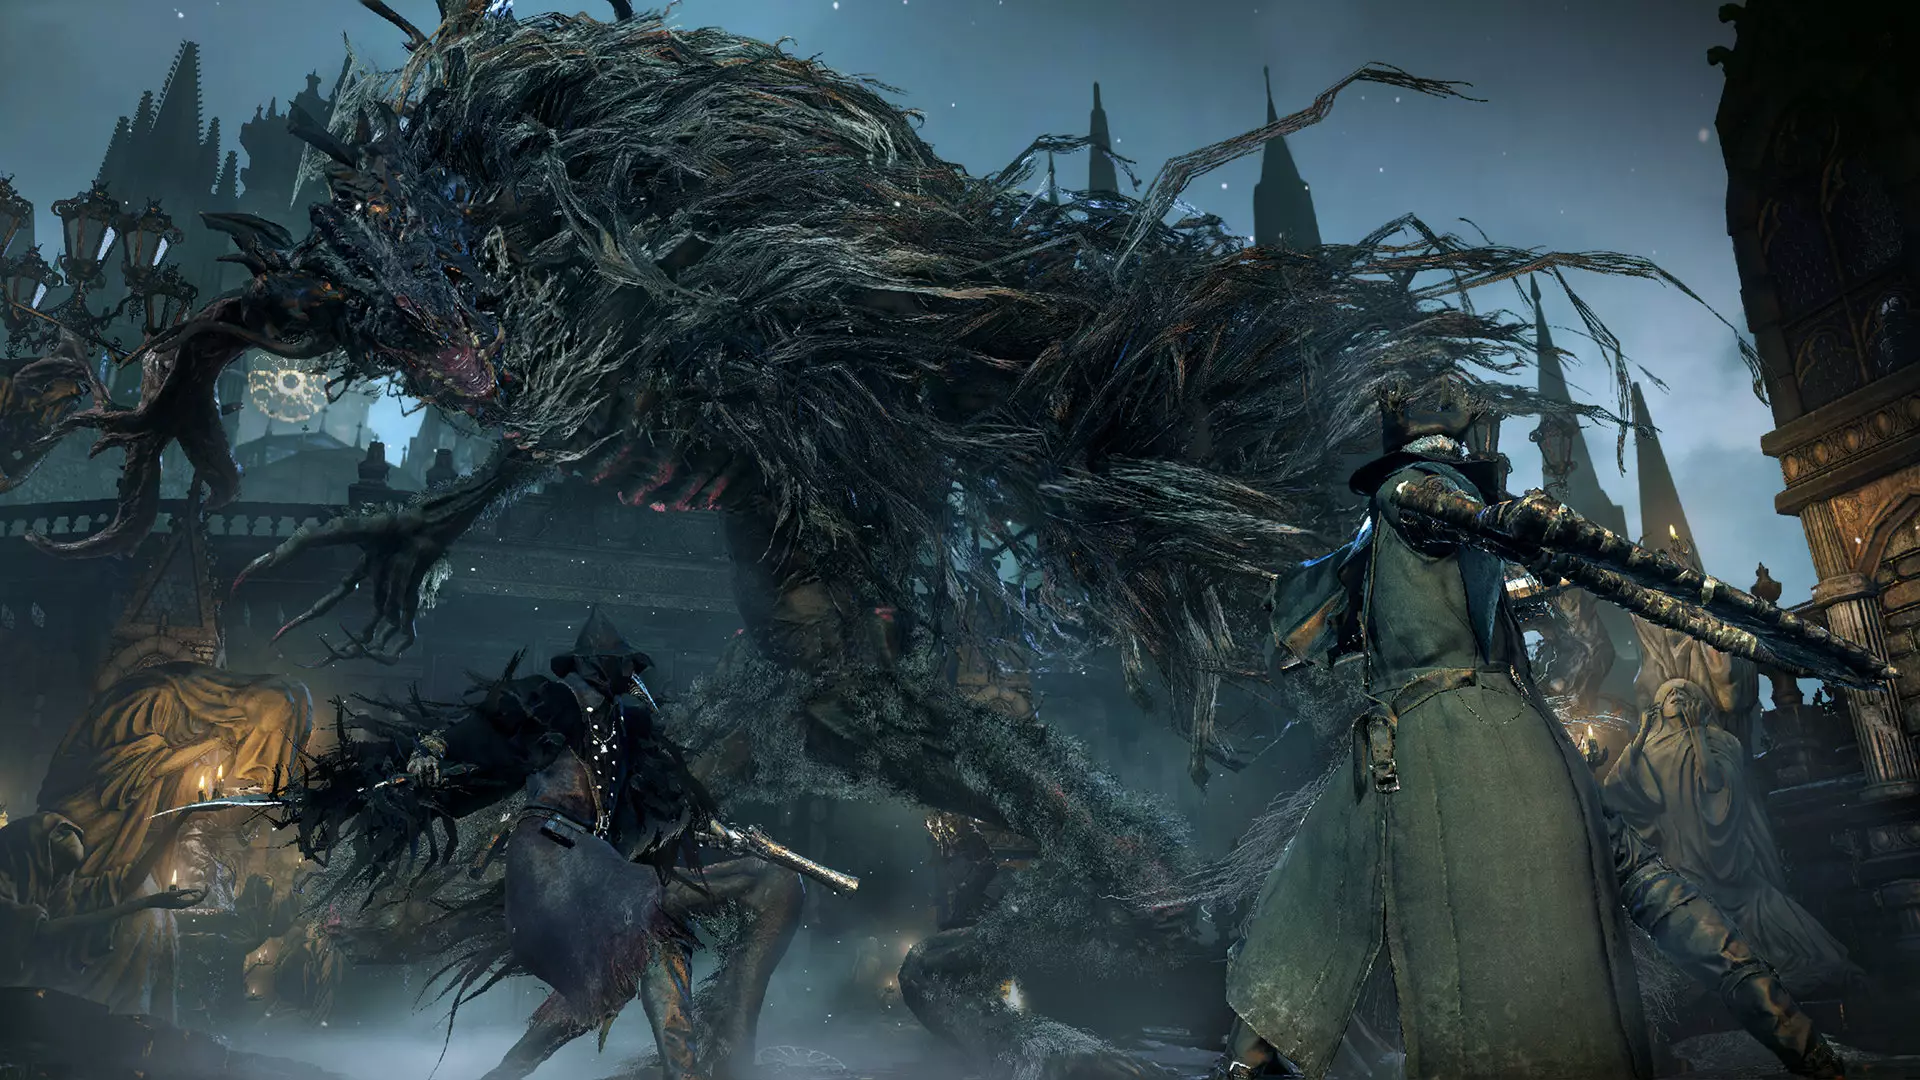 Bloodborne's combat pushed you to run into fights